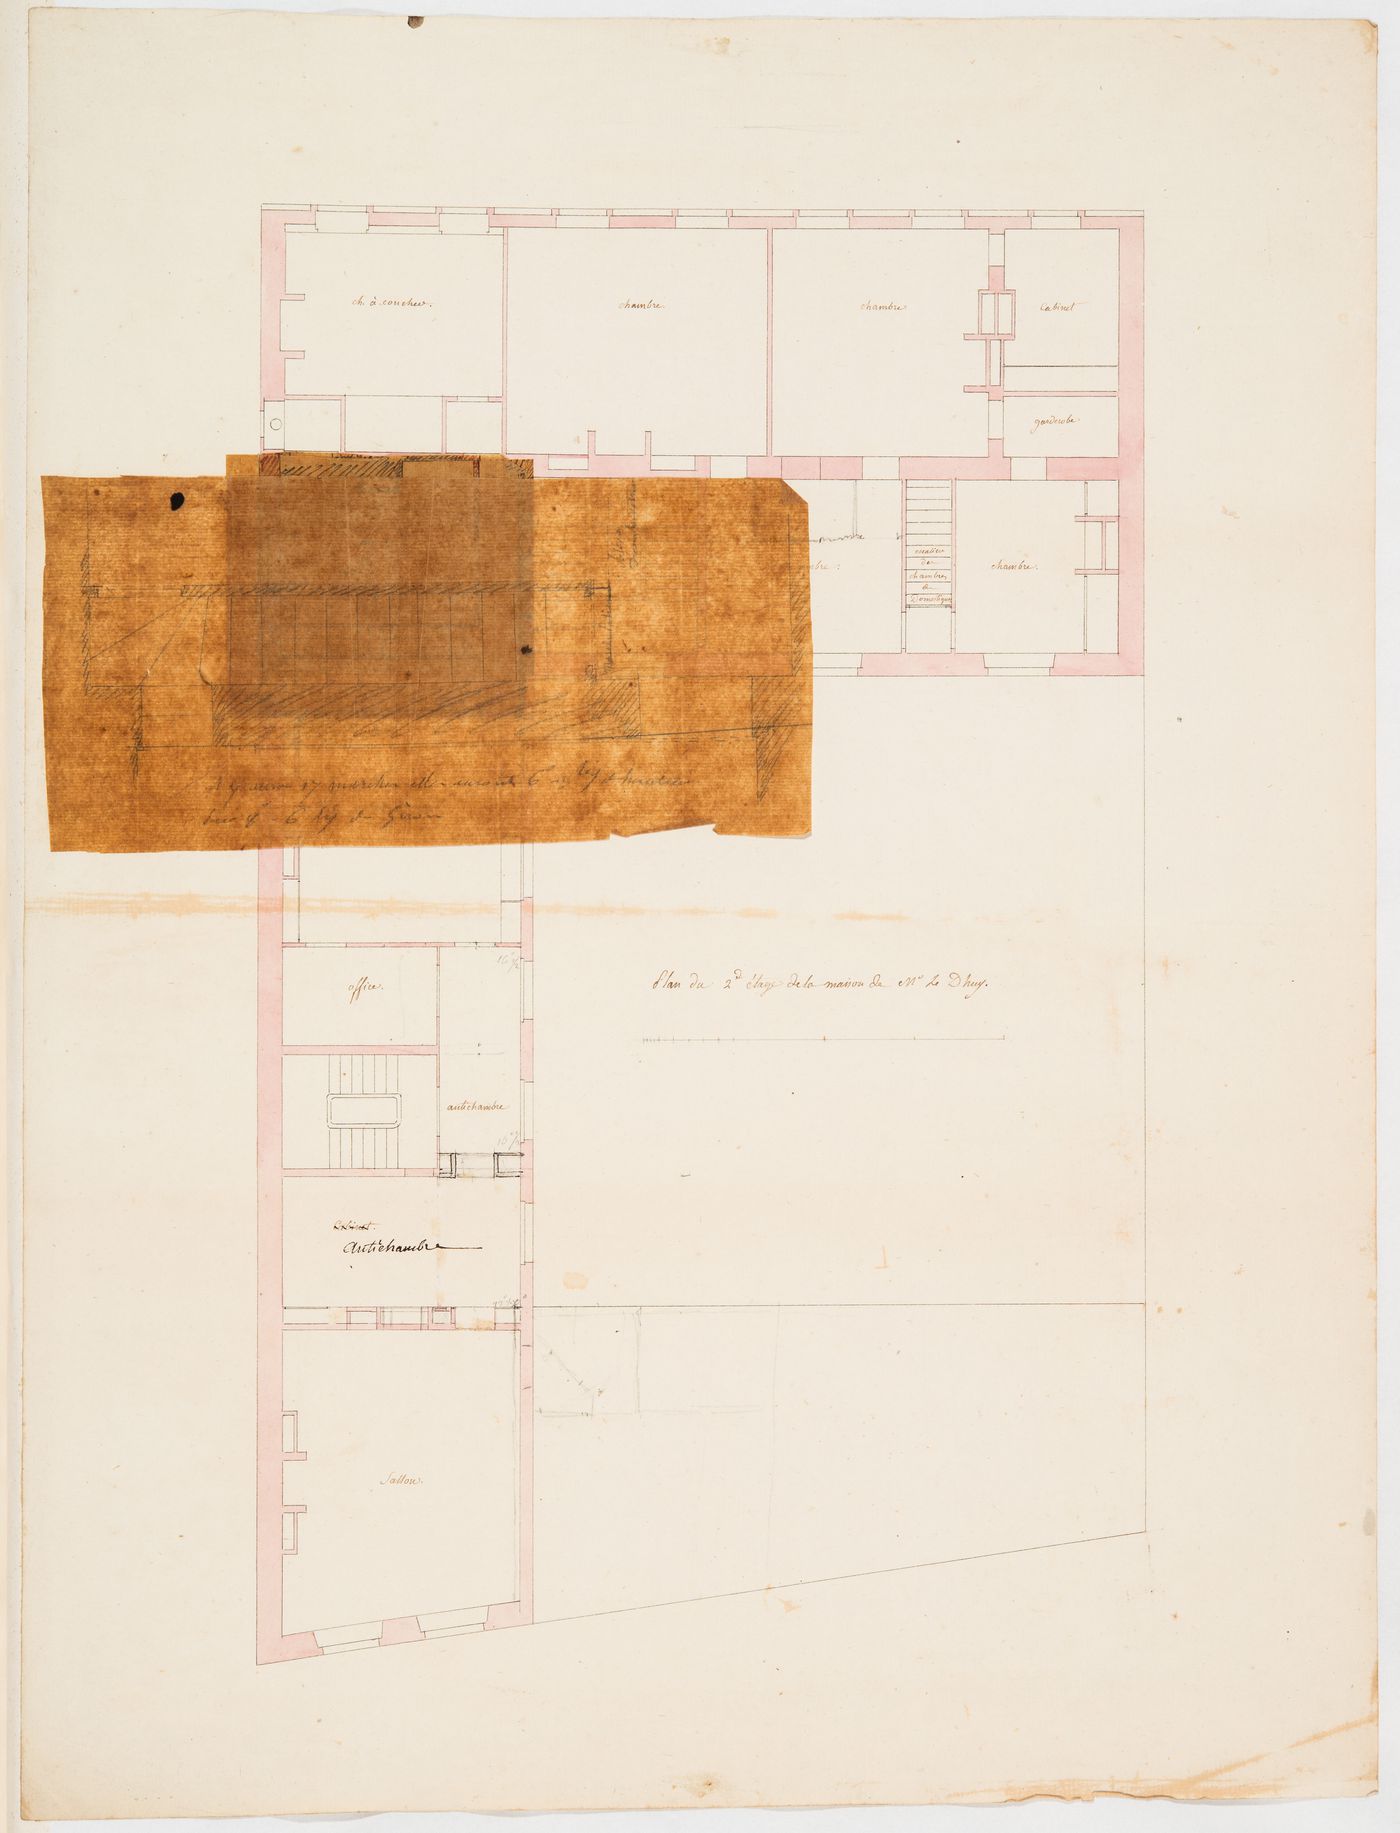 Project for renovations for a house for M. le Dhuy: Plans for the second floor and stairs